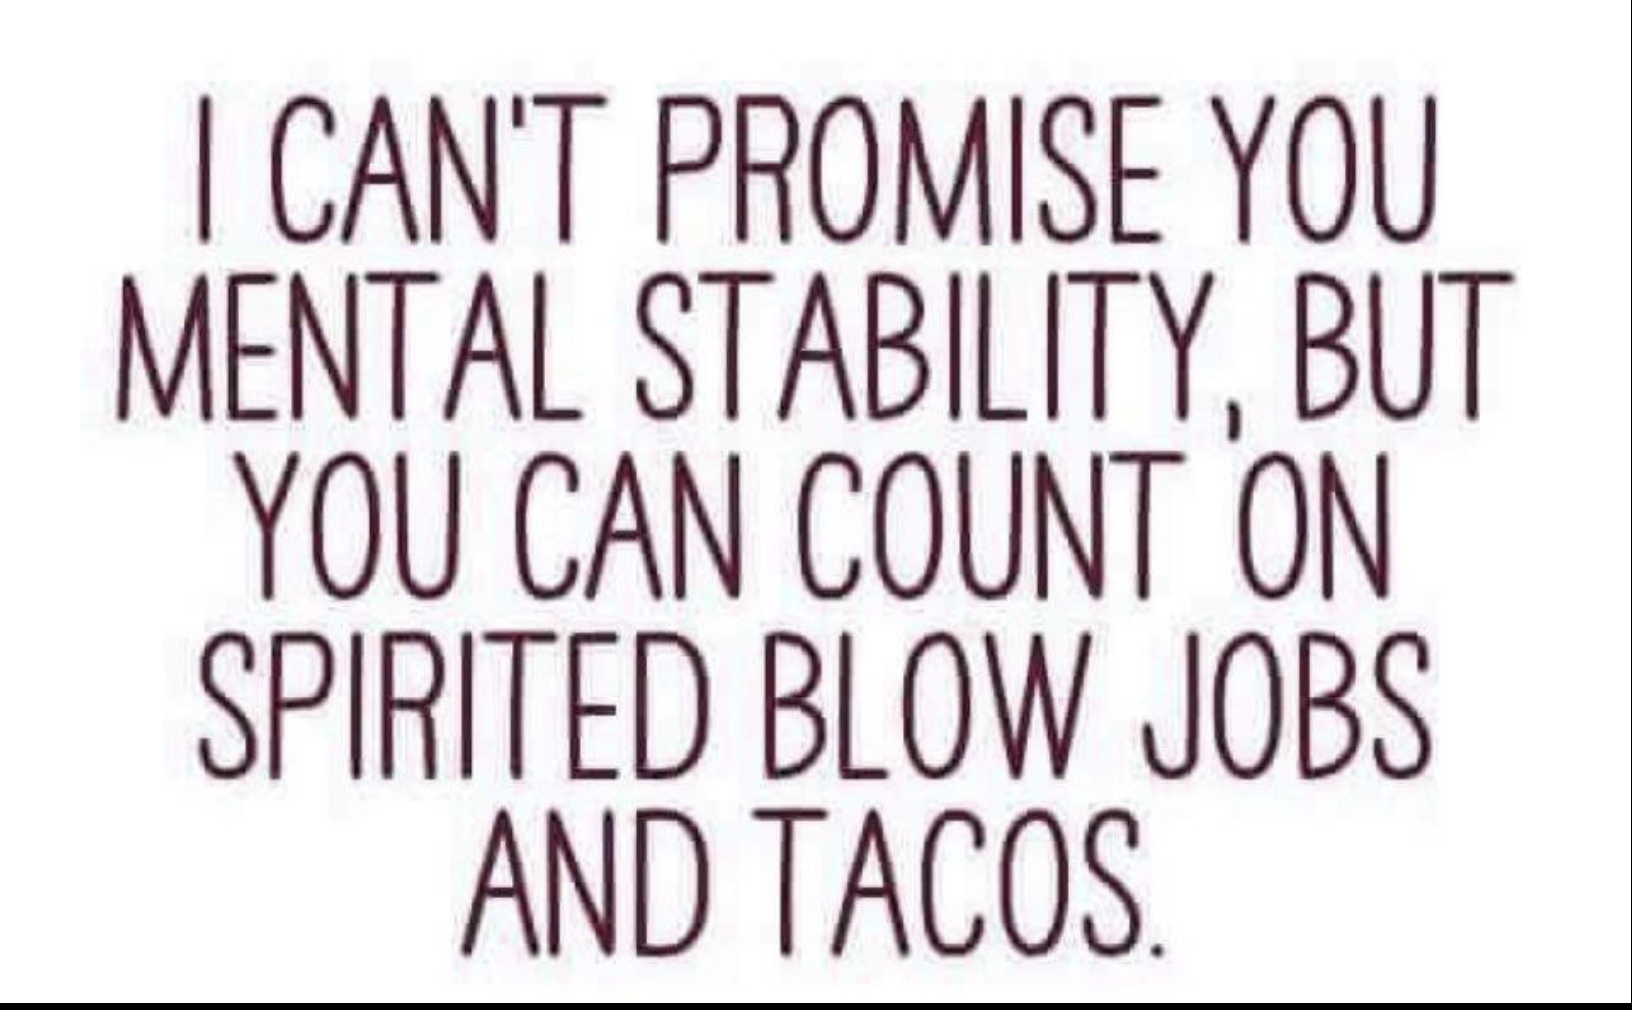 But You Can Count On Spirited Blow Jobs And Tacos.